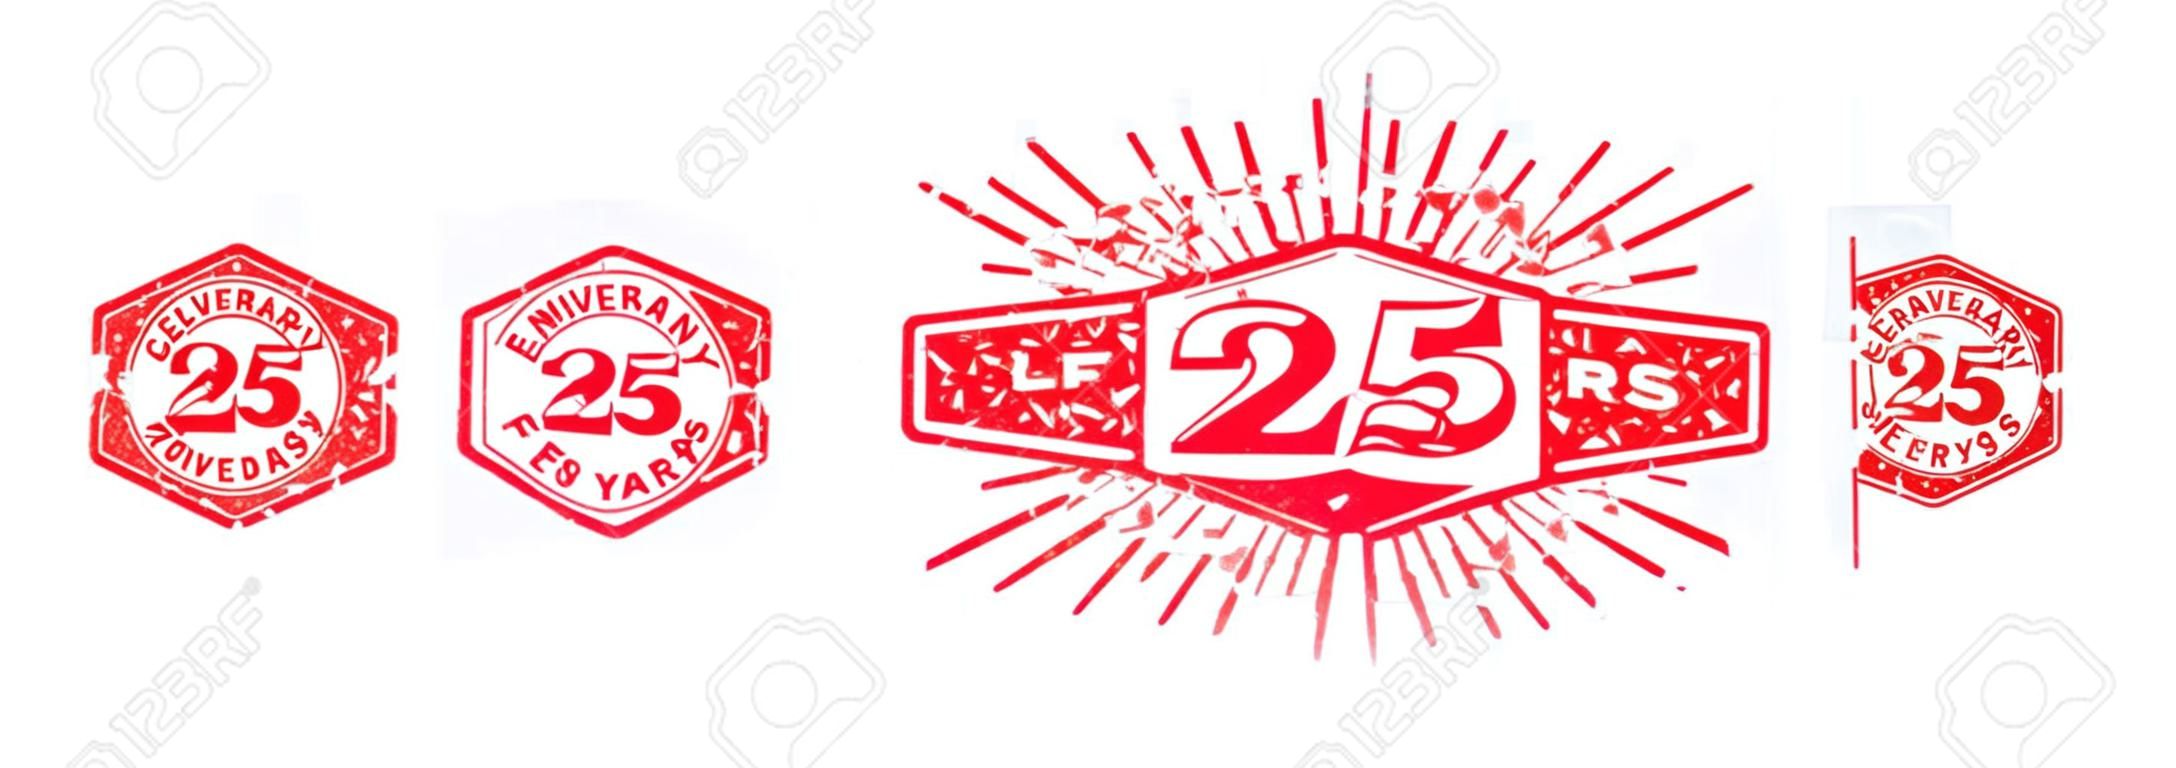 A group of 25 years anniversary logos drawn in the form of stamps, red frames for celebration. Grunge rubber stamp texture. Distressed texture stamp. Collection of postage stamps. Vector round stamps